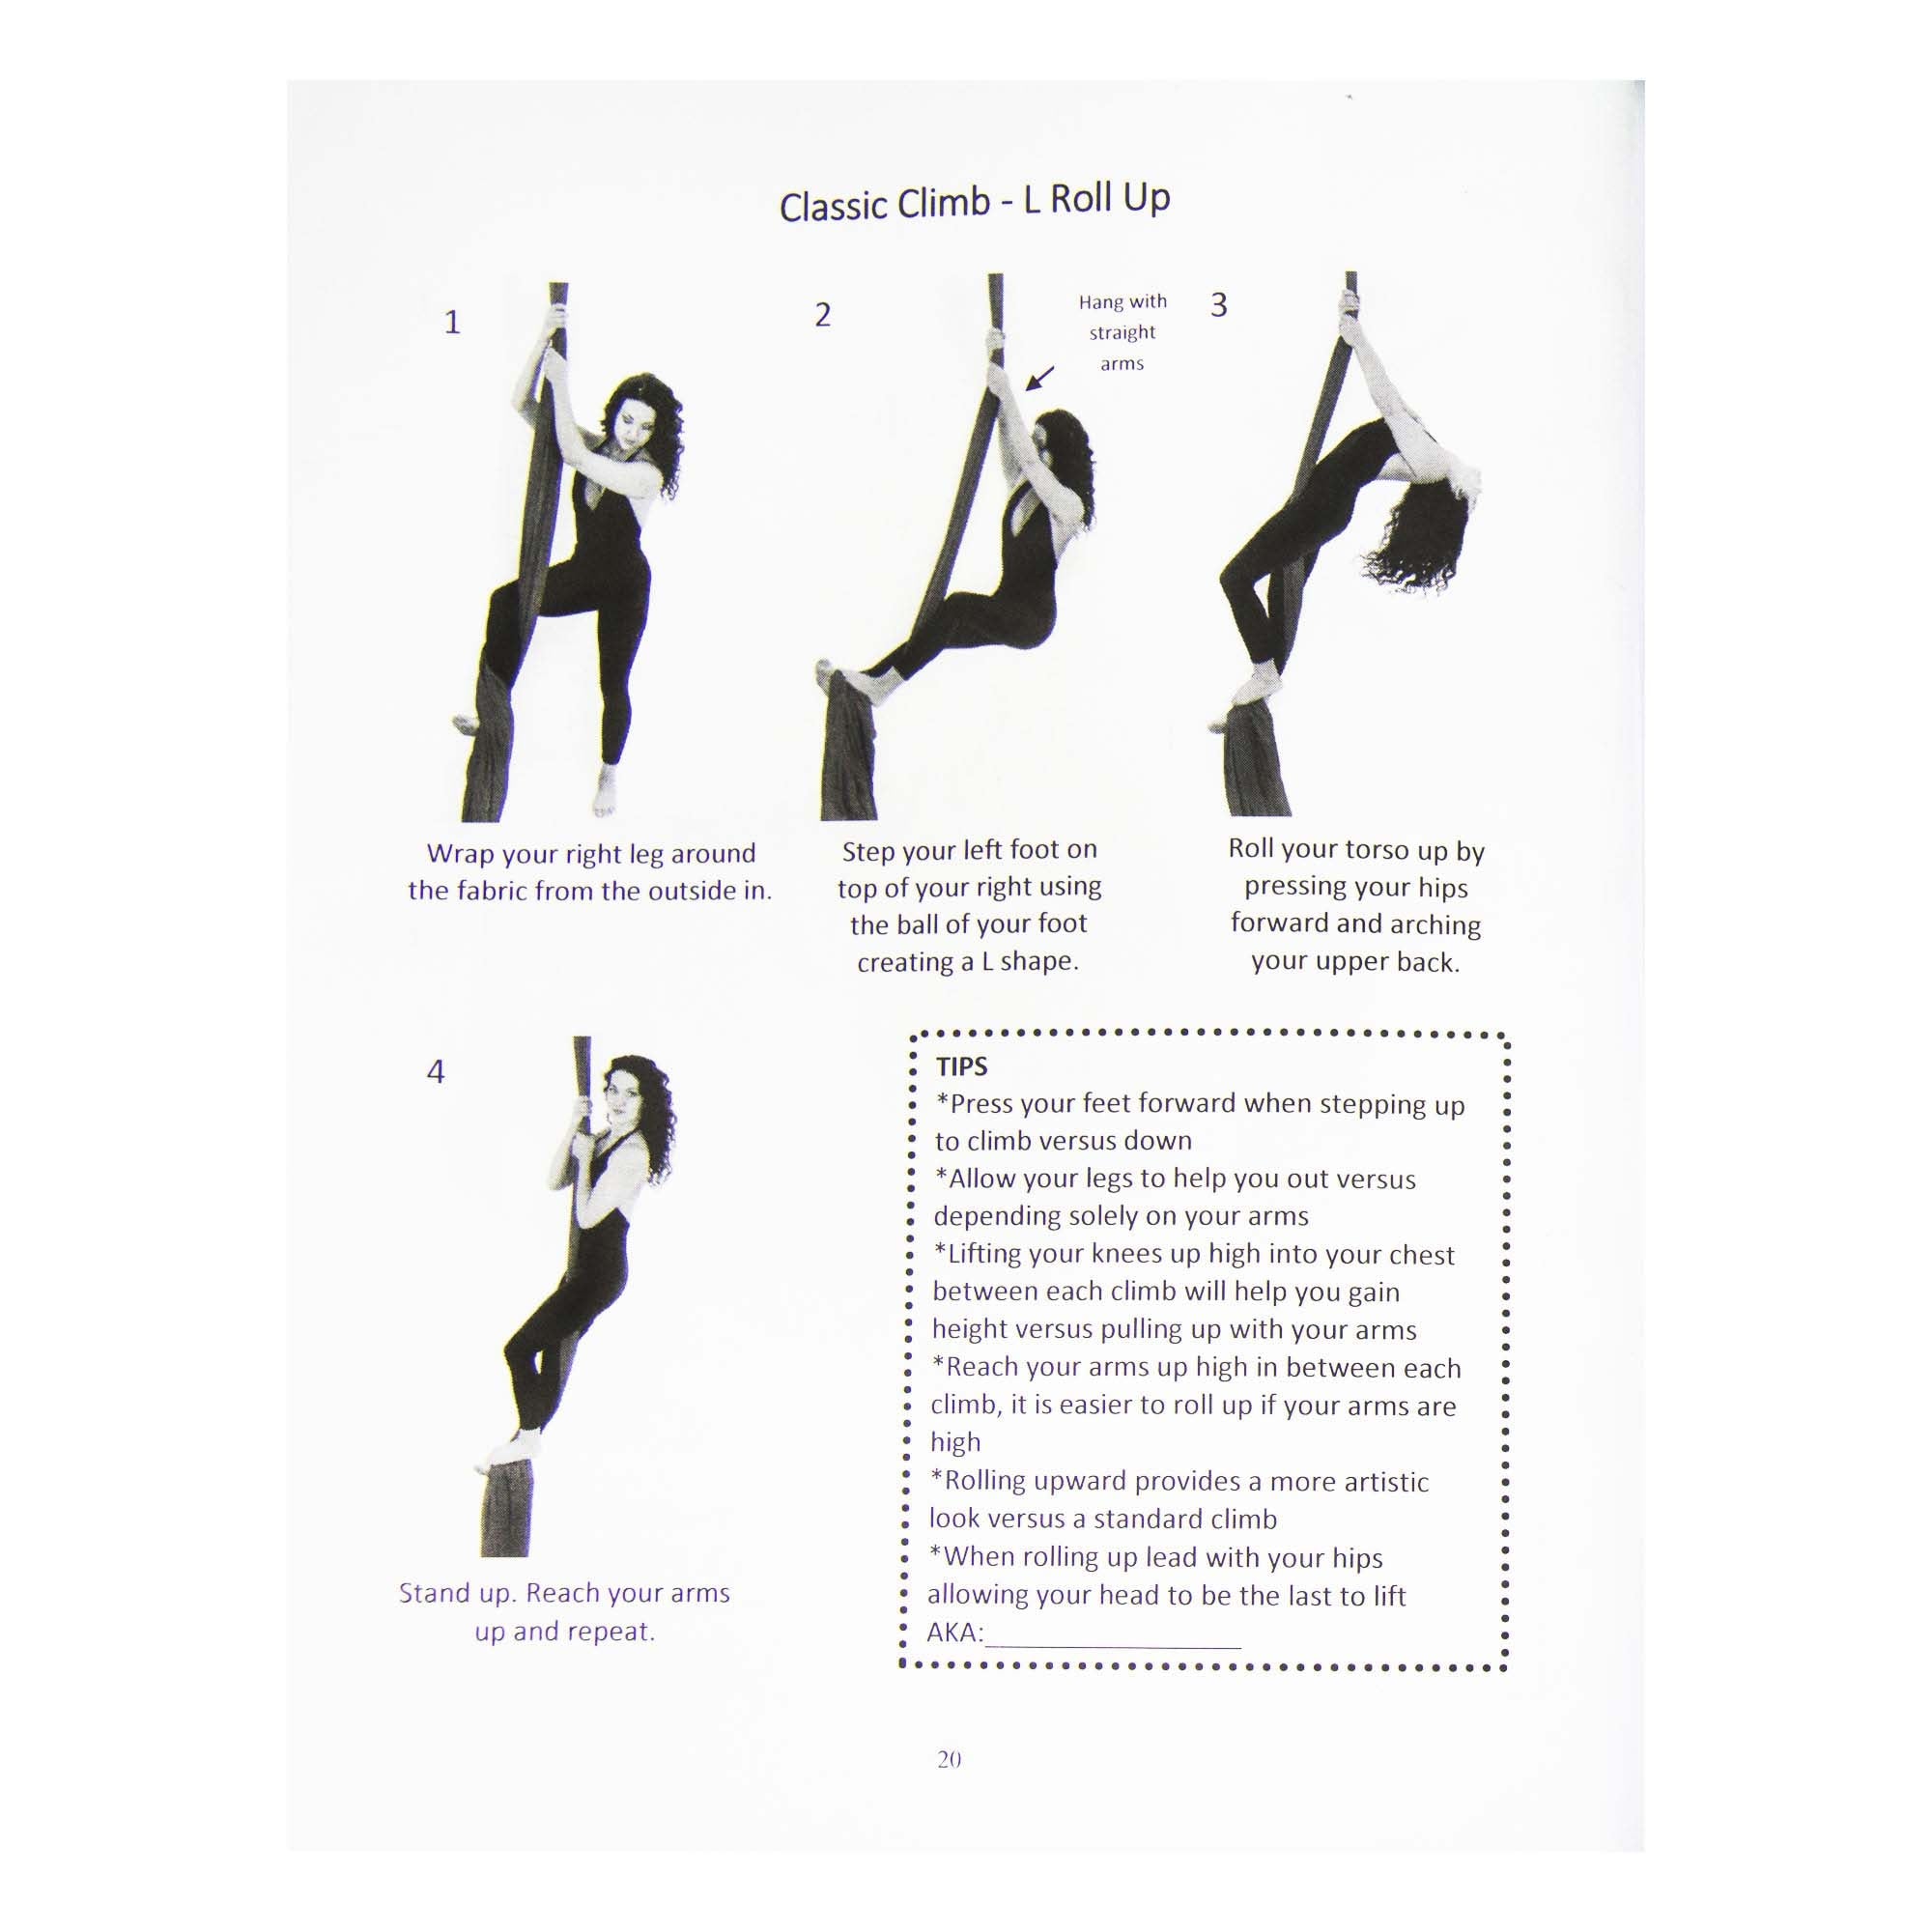 Intermediate Guide to Aerial Silk example page showing a classic climb with black and white photos, text, and tips.